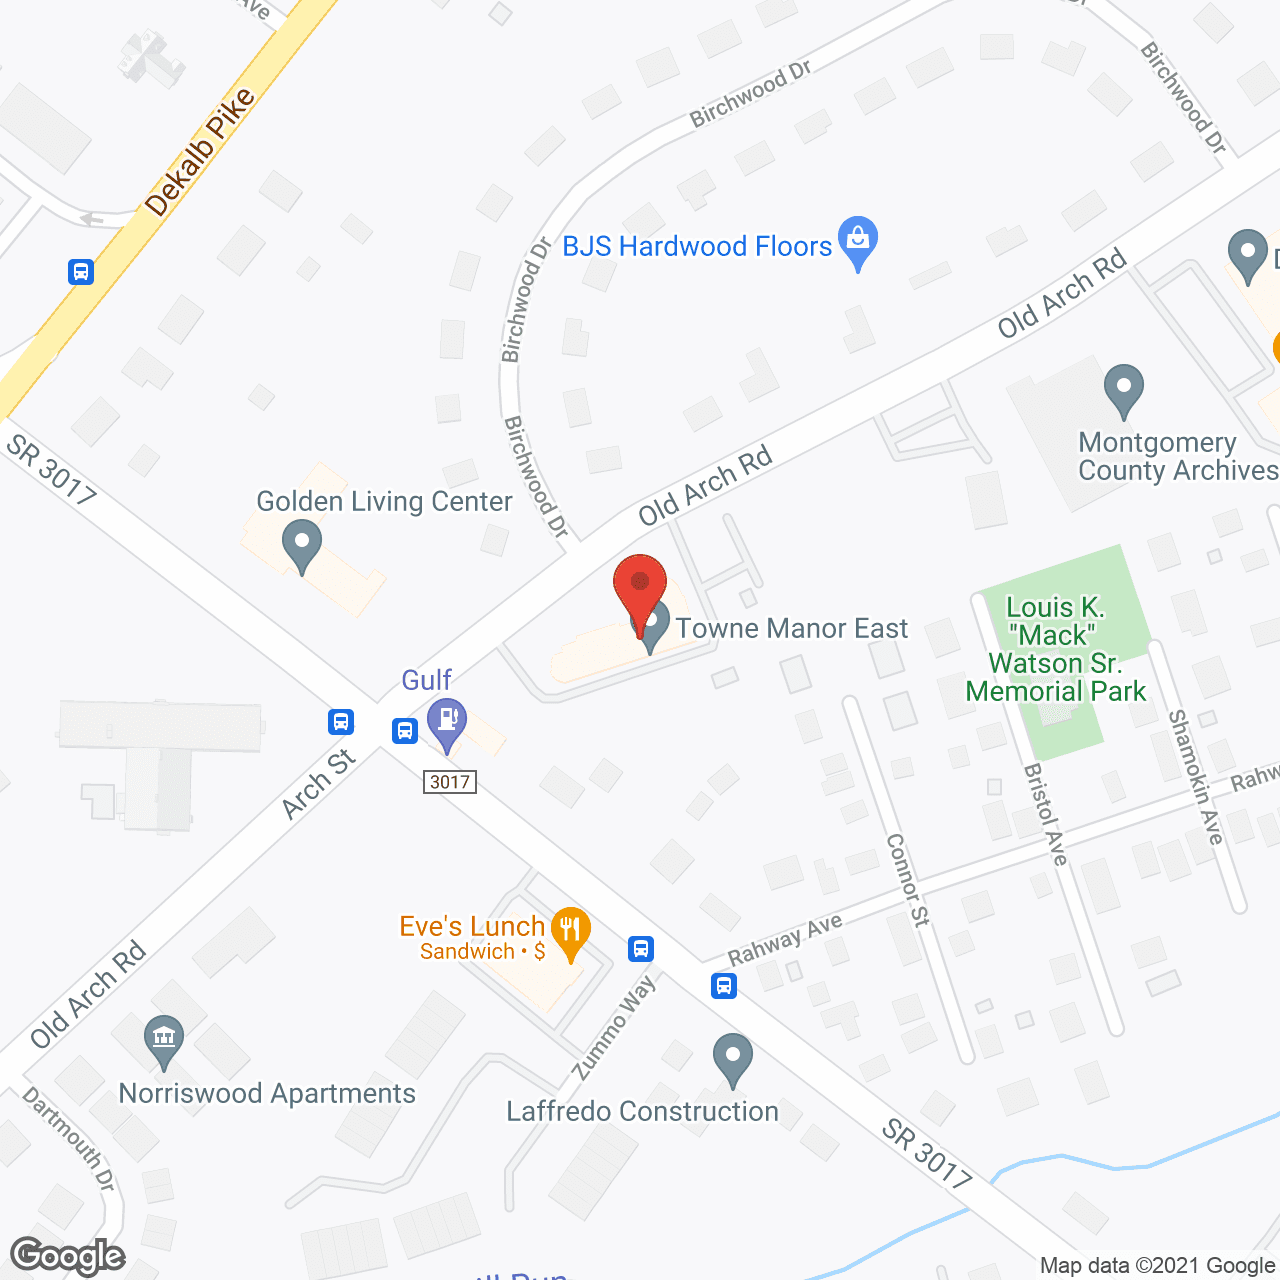 Towne Manor East in google map